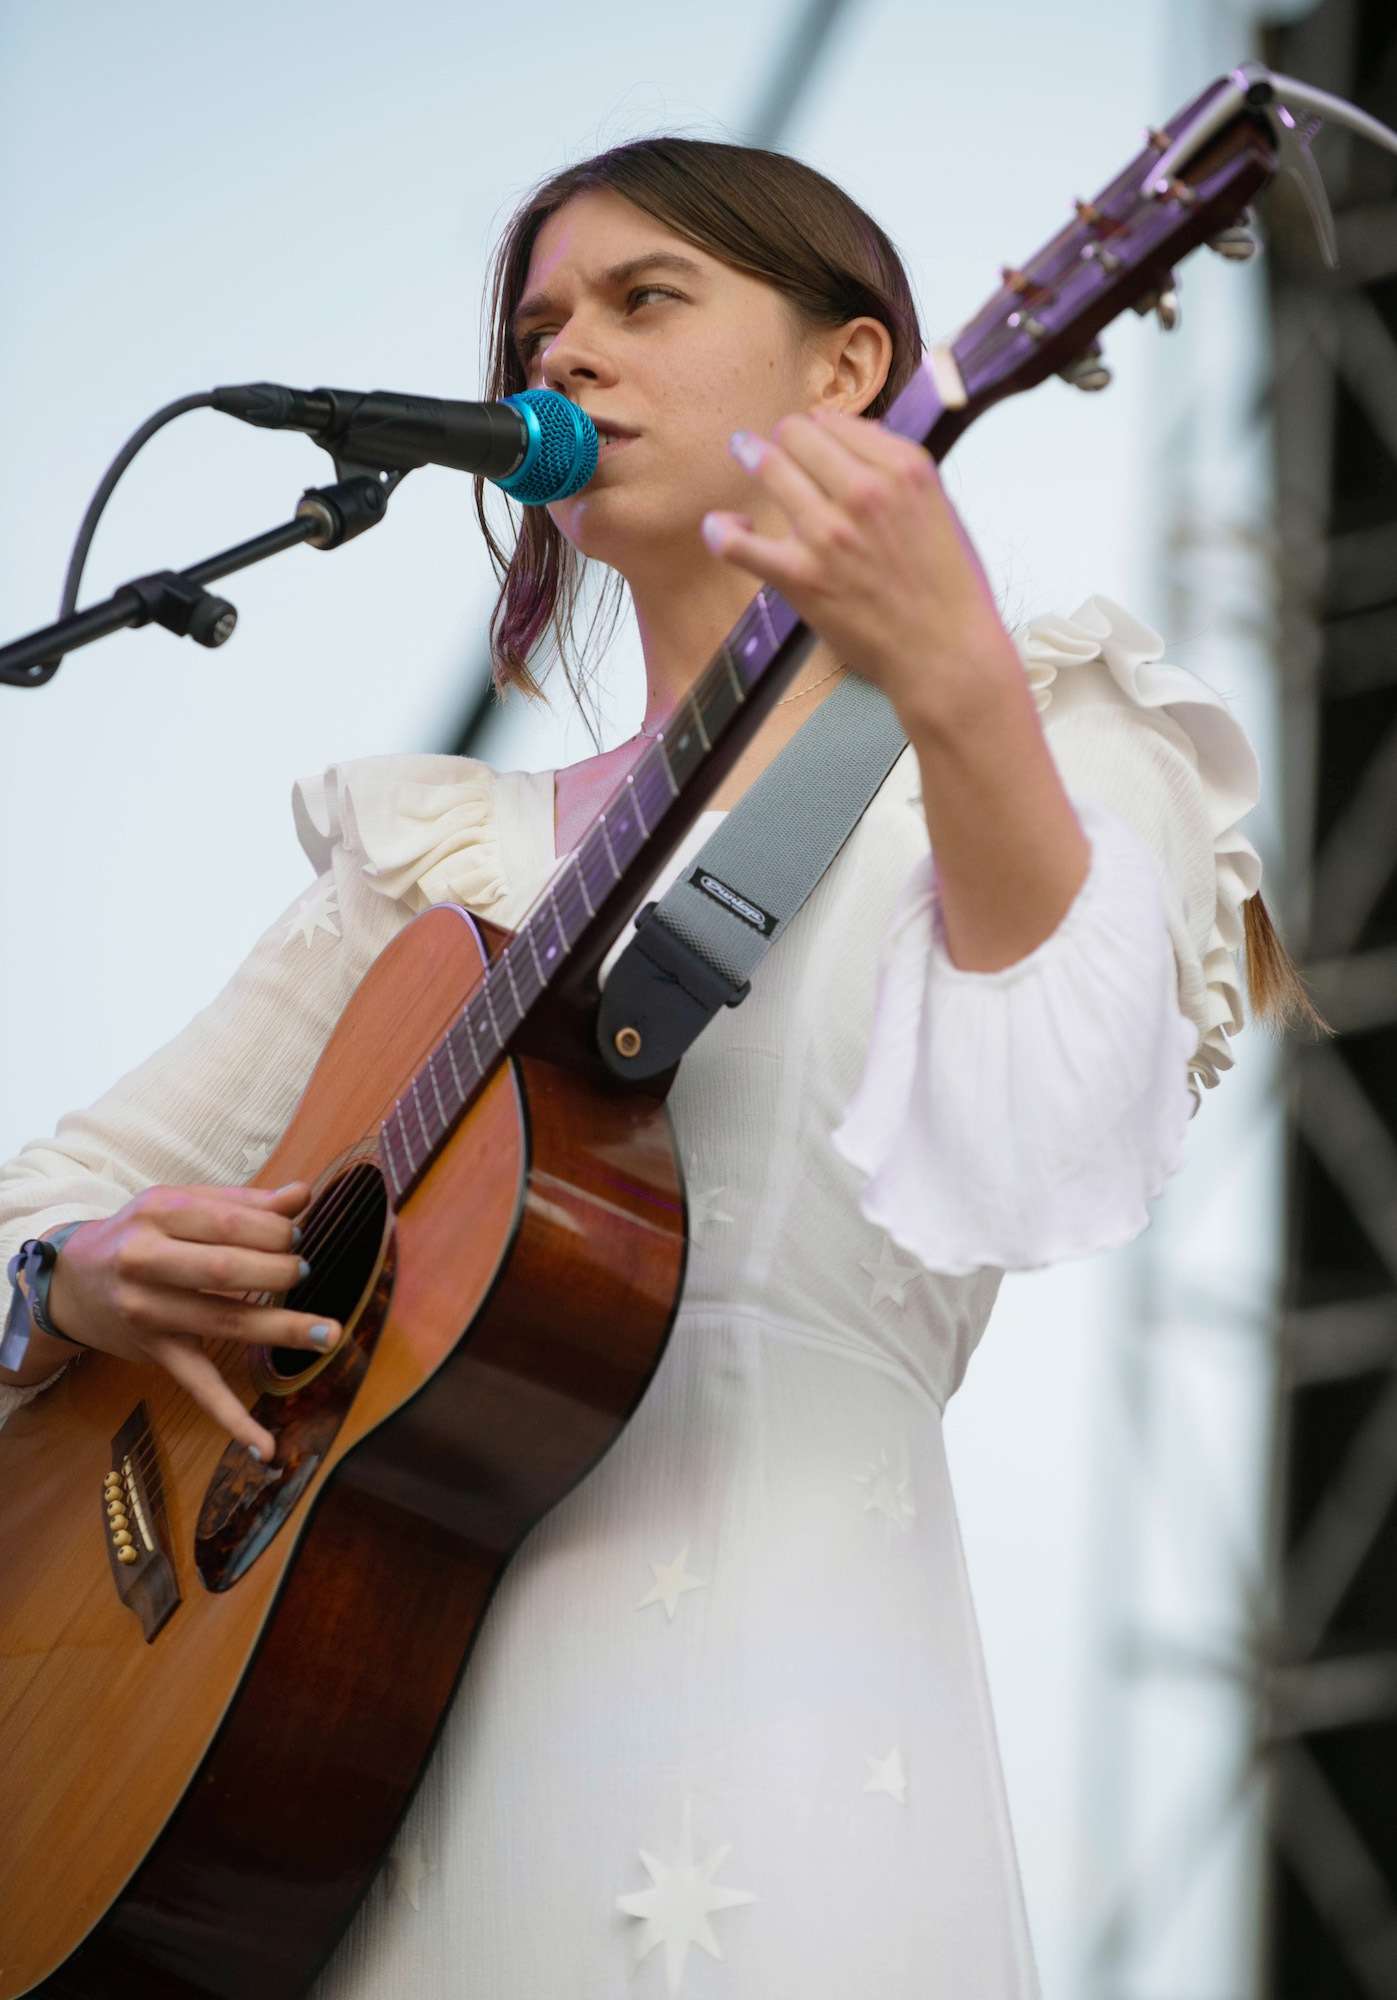 Tomberlin Live at Pitchfork [GALLERY] 4